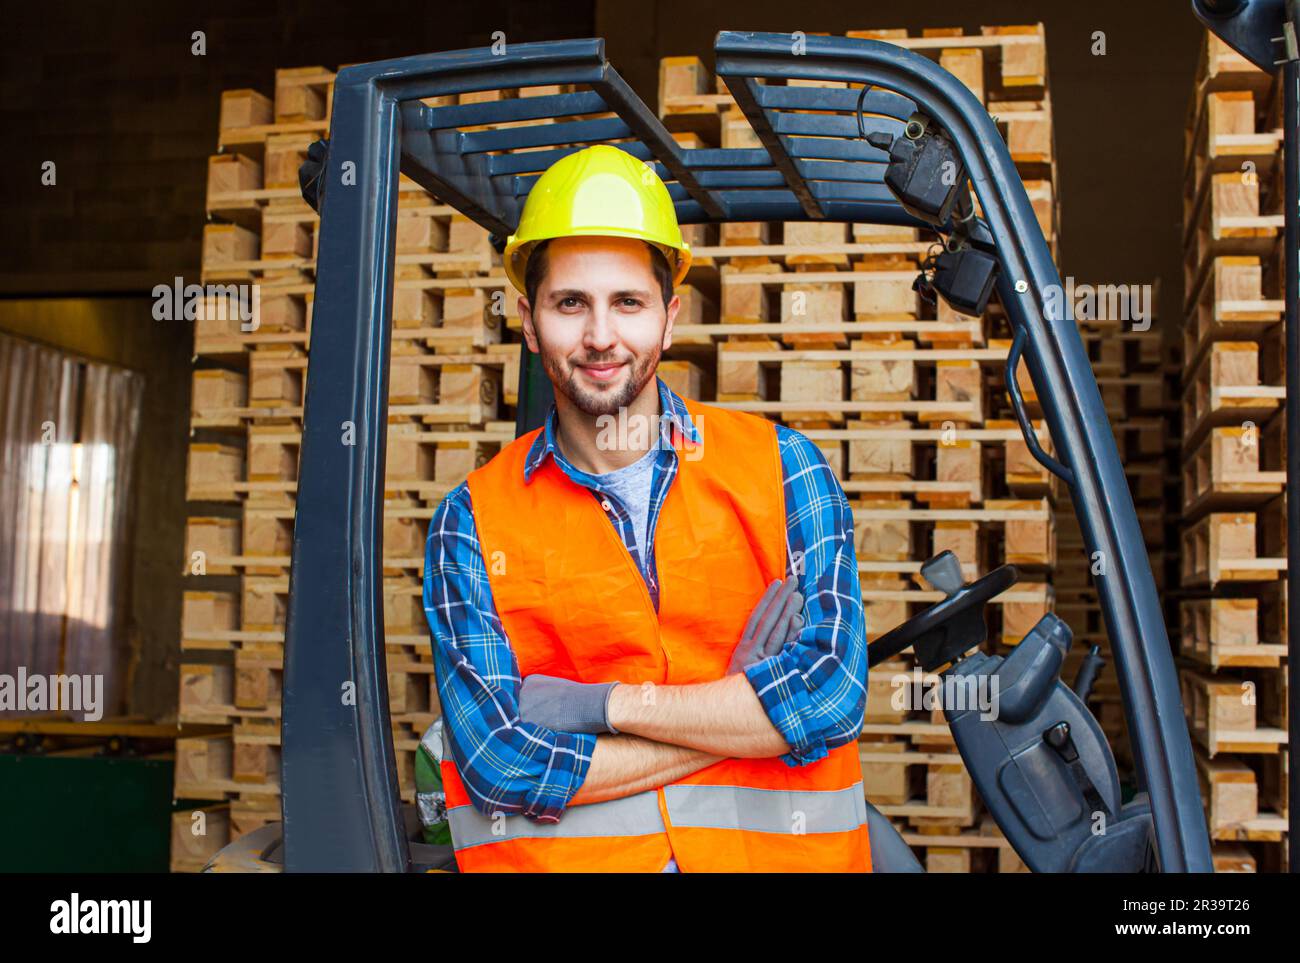 Handsome smiling worker driving forklift in warehouse. Woodworking industry concept. Stock Photo